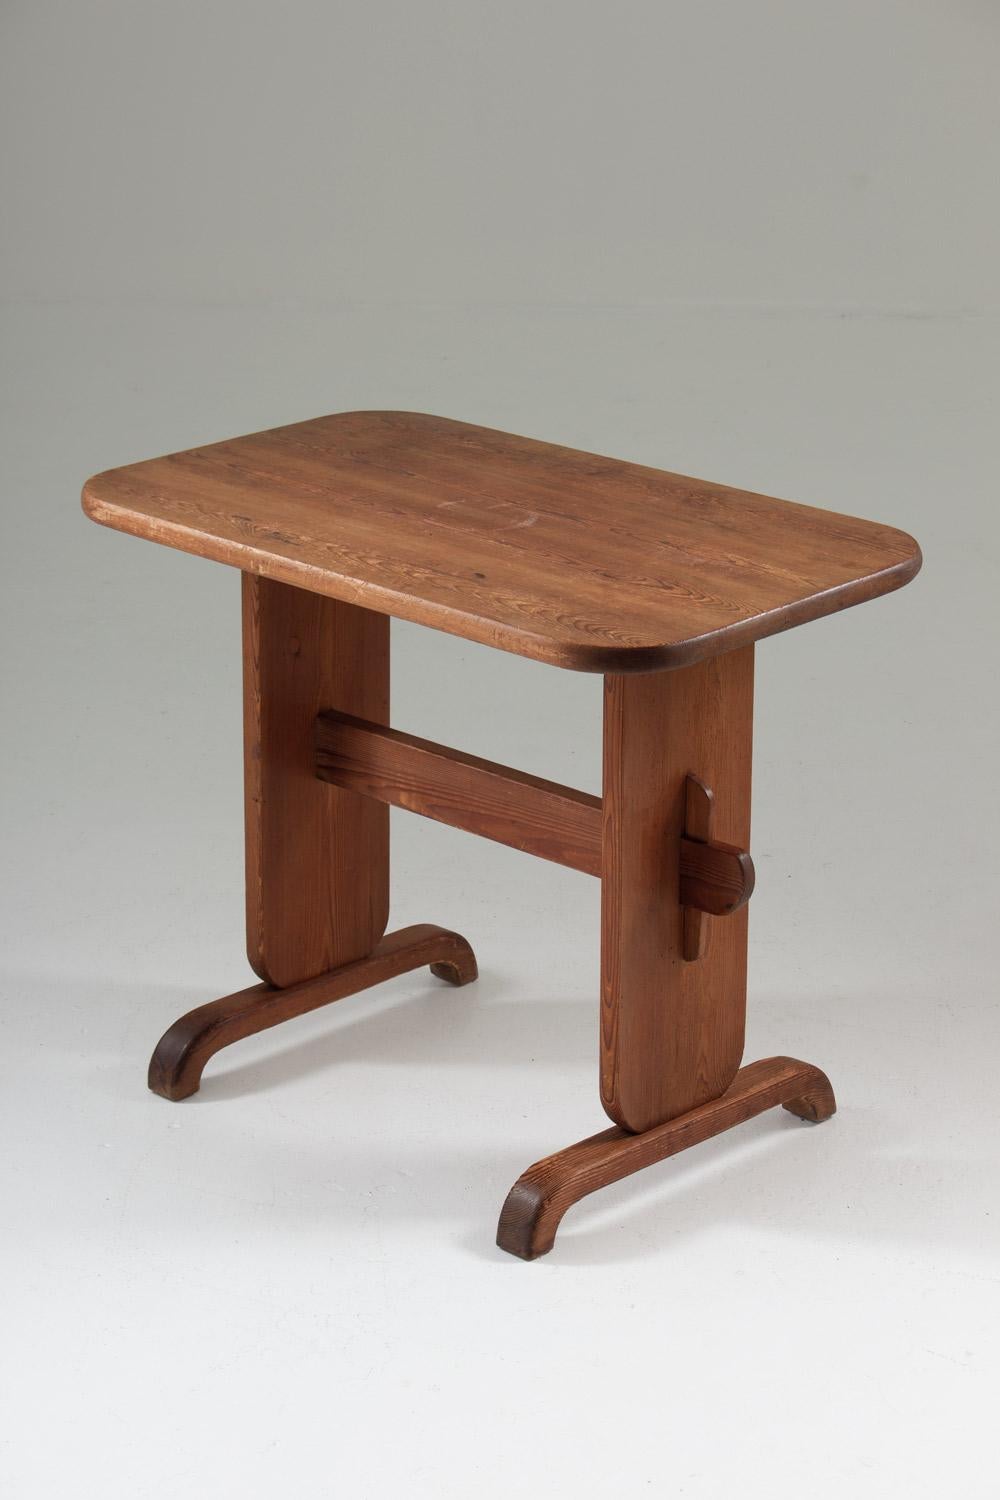 Beautiful and highly rare Swedish acid-stained side table by Bo Fjæstad, Sweden.
This studio craft table is a great example of the pine furniture made for cabins that was produced during the early modernist era in Sweden, by names like Axel Einar